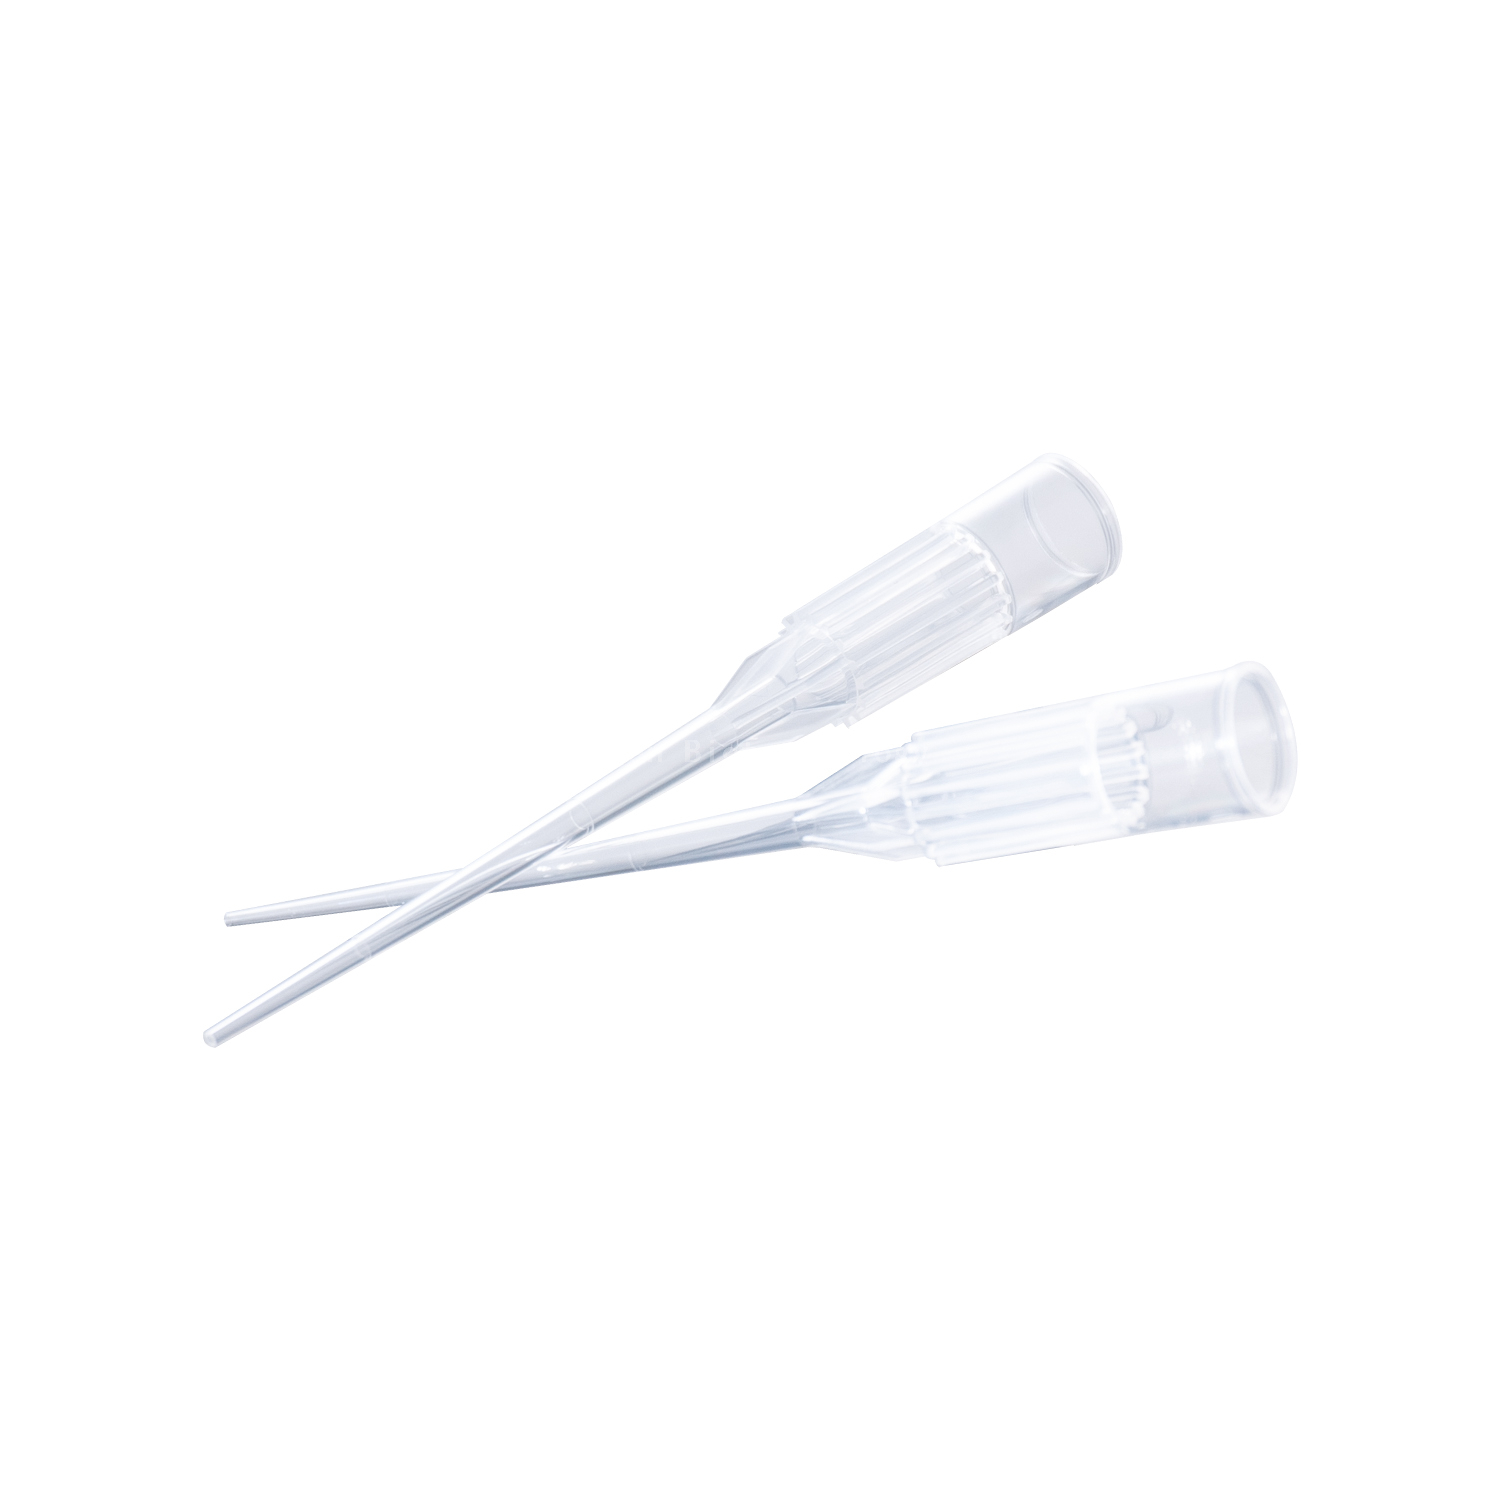 Rainin Low Retention 20uL Transparent Midsci Pipette Tips with Eco Space Safe Package 